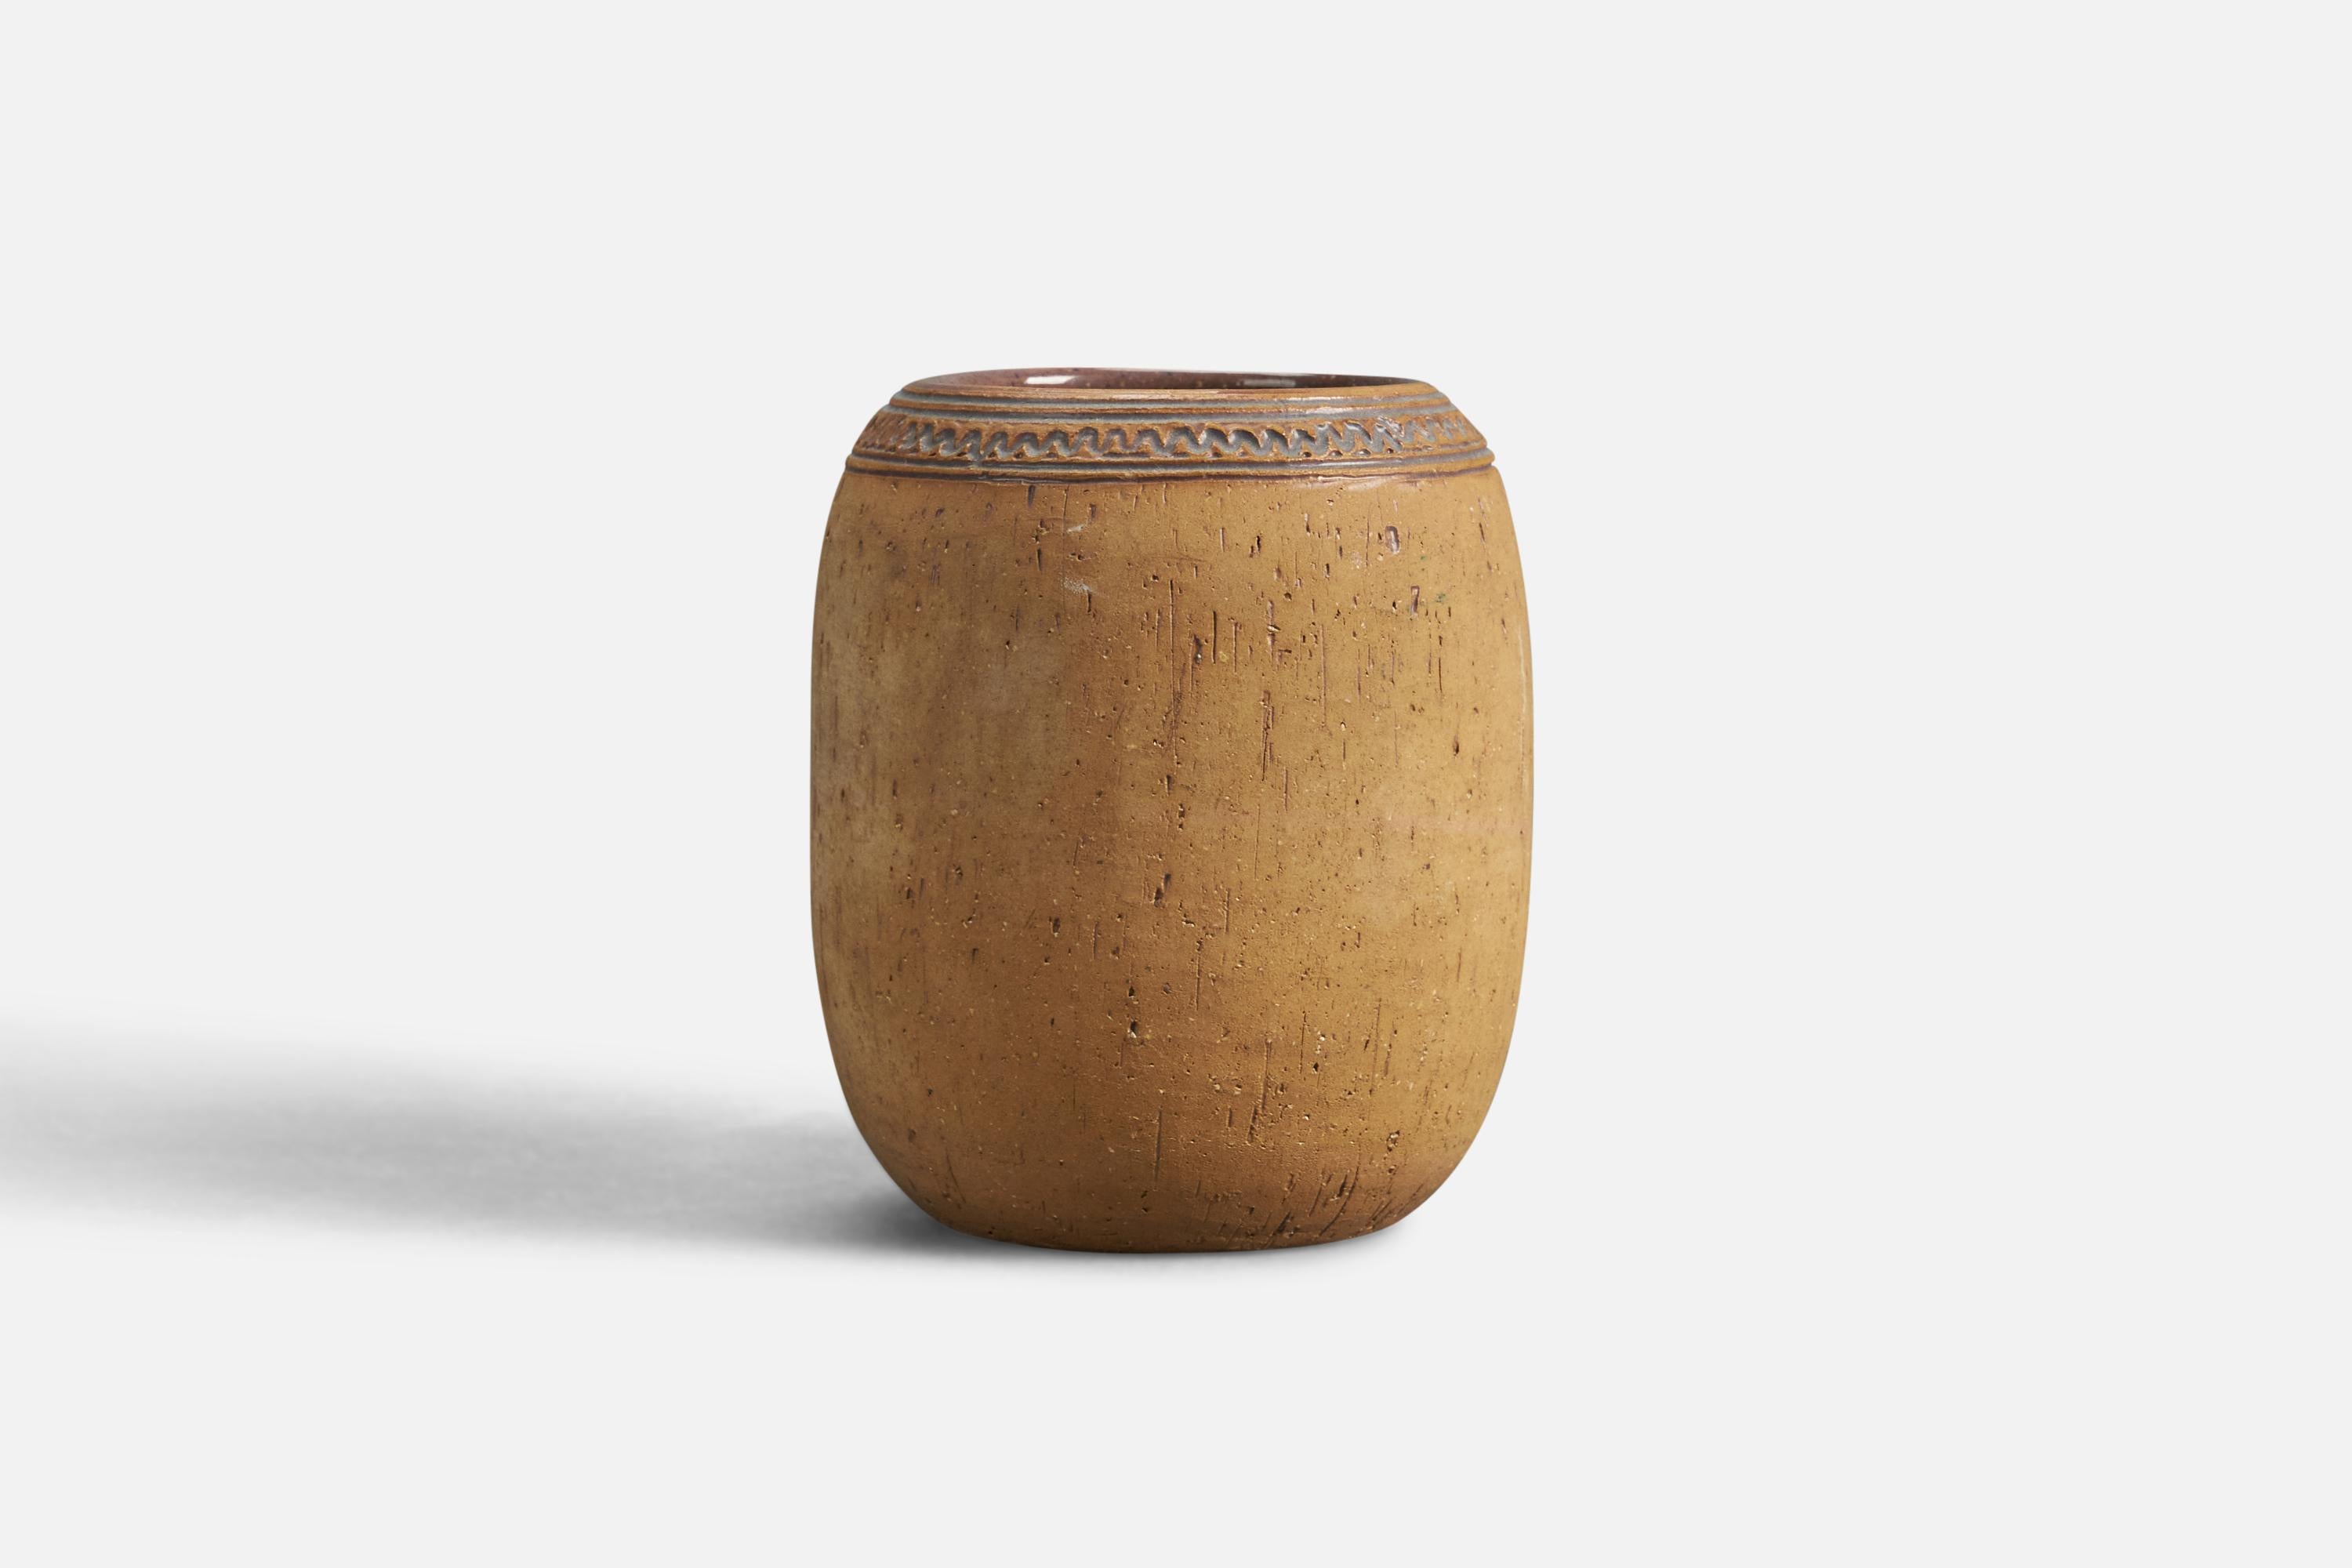 A stoneware vase designed by Gösta Löthman and produced in Hjo, Sweden, 1970s.